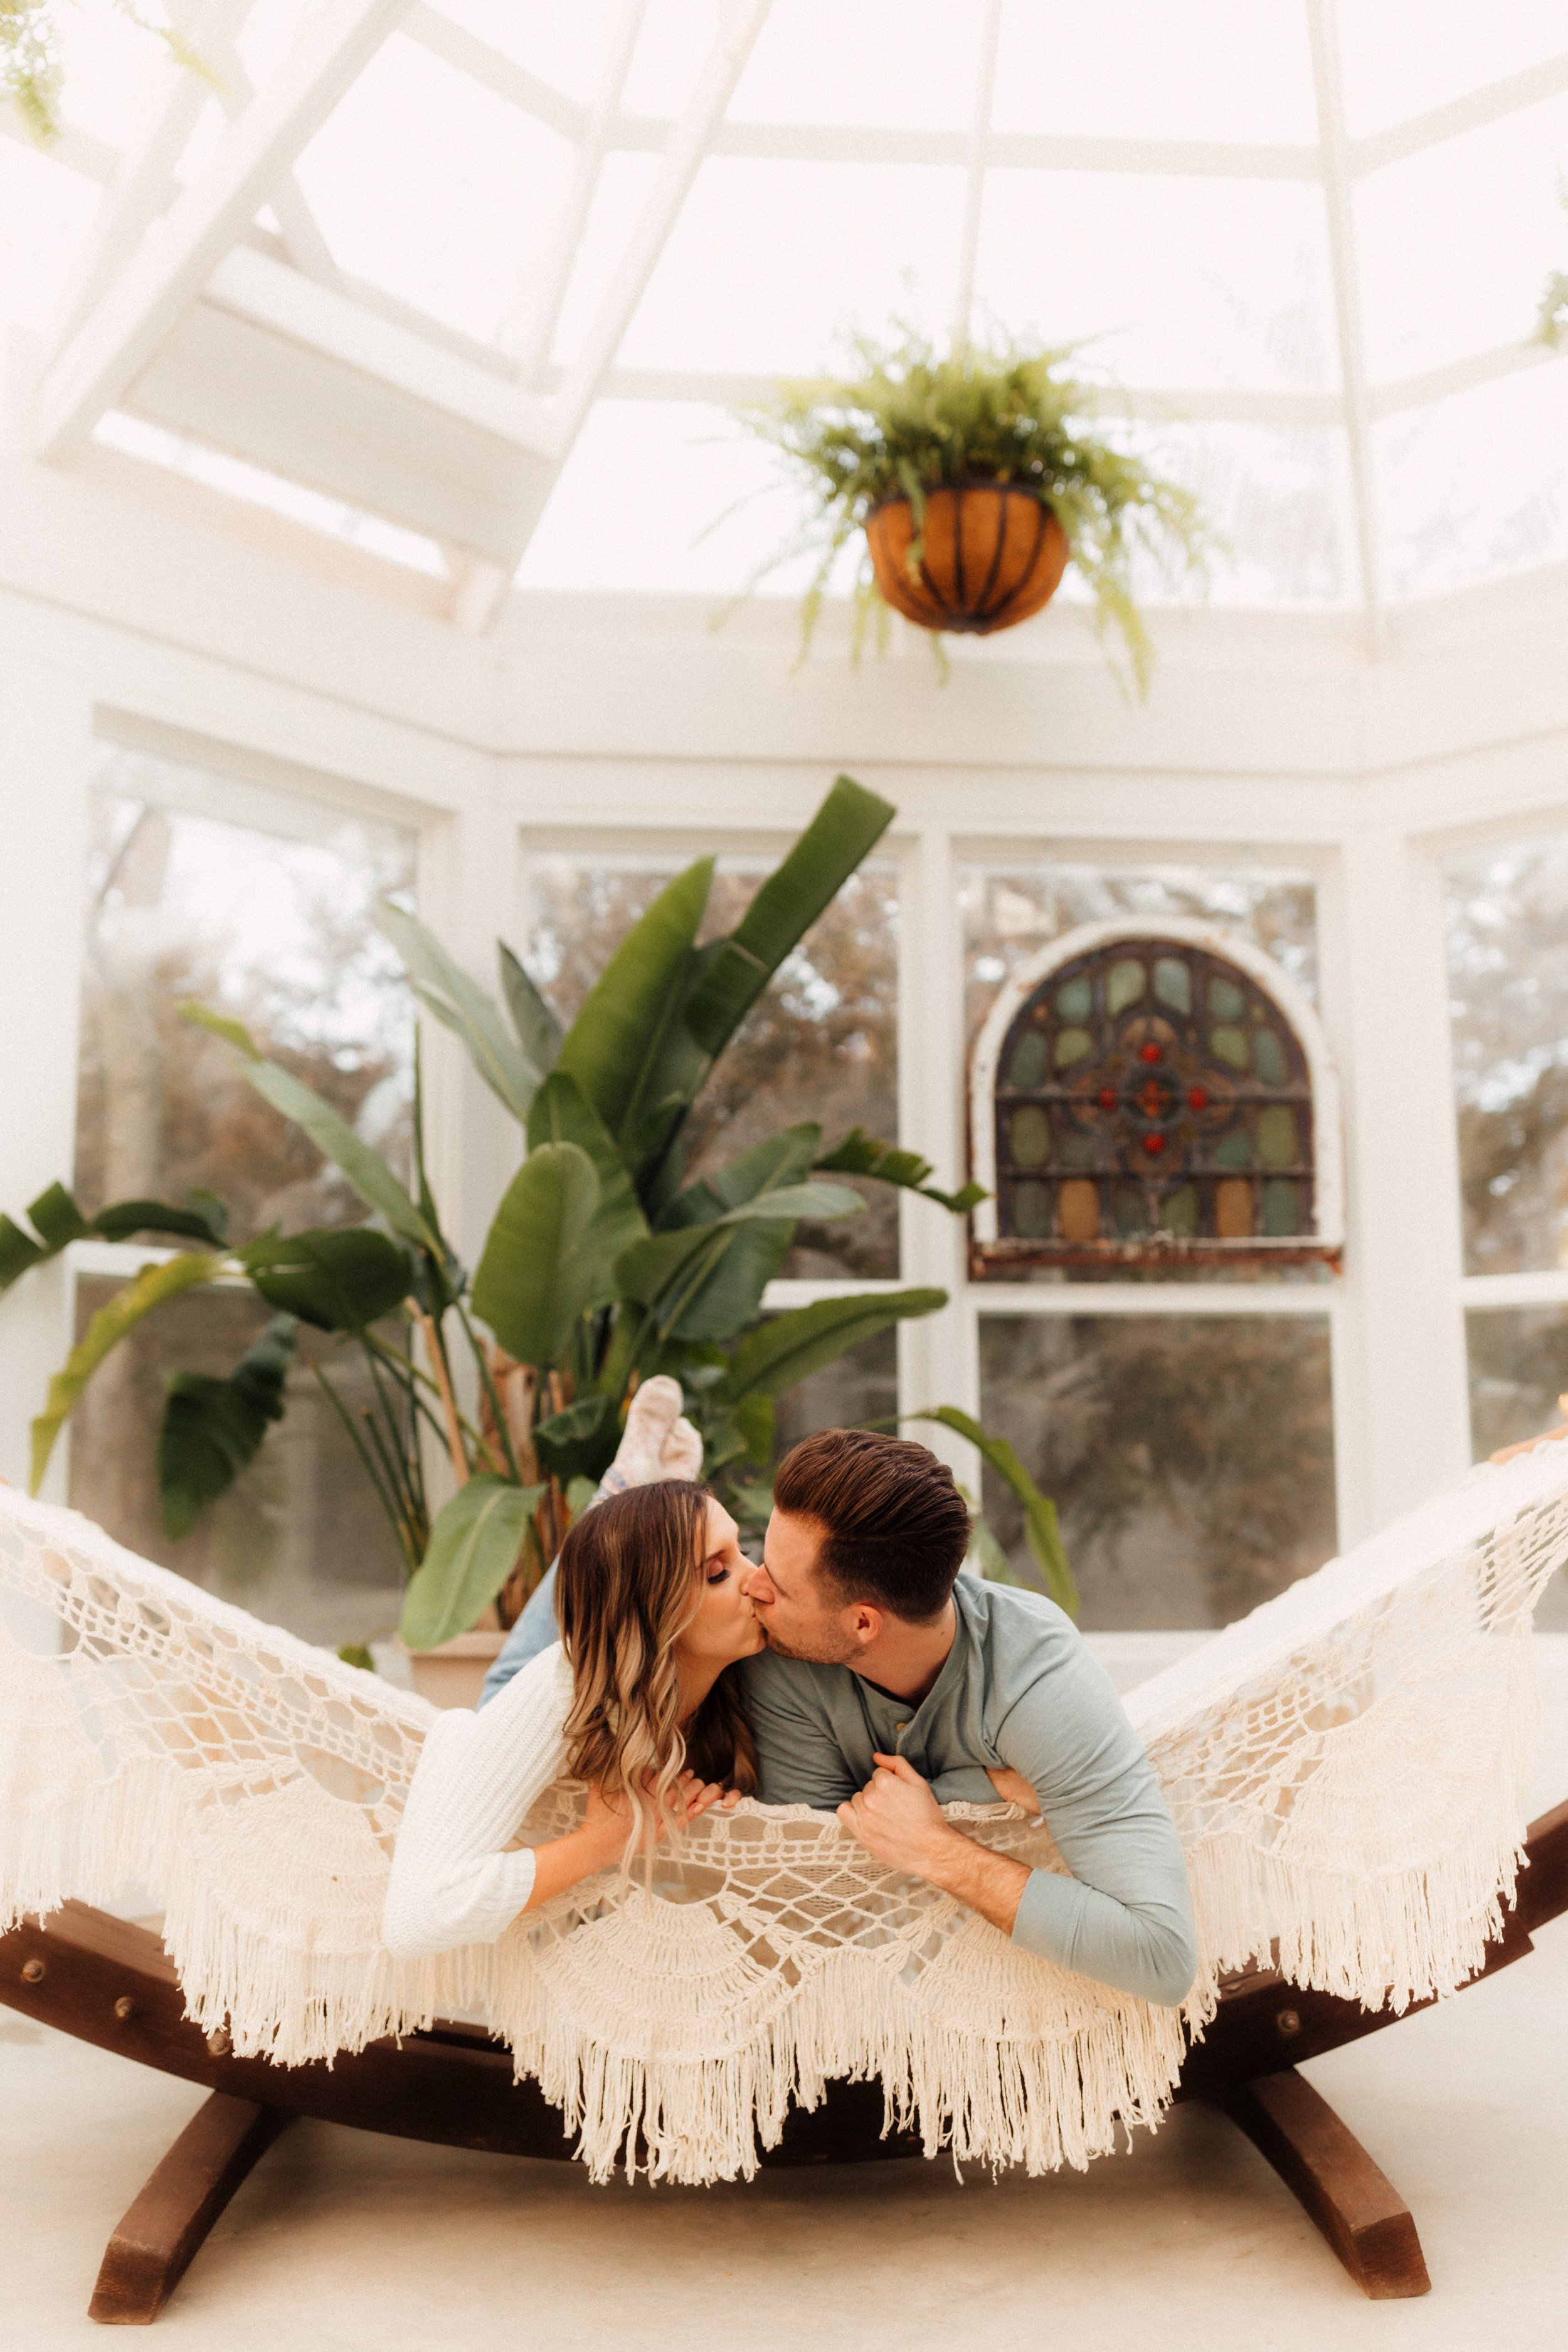 Laura_Ben_Engagment_Session_Winterset_Des_moines_Iowa_Couples_Photographer_Iris_Aisle_Cabin_Conservatory_Candid_Snow_Day_Winter_KMP_Photography-1285.jpg